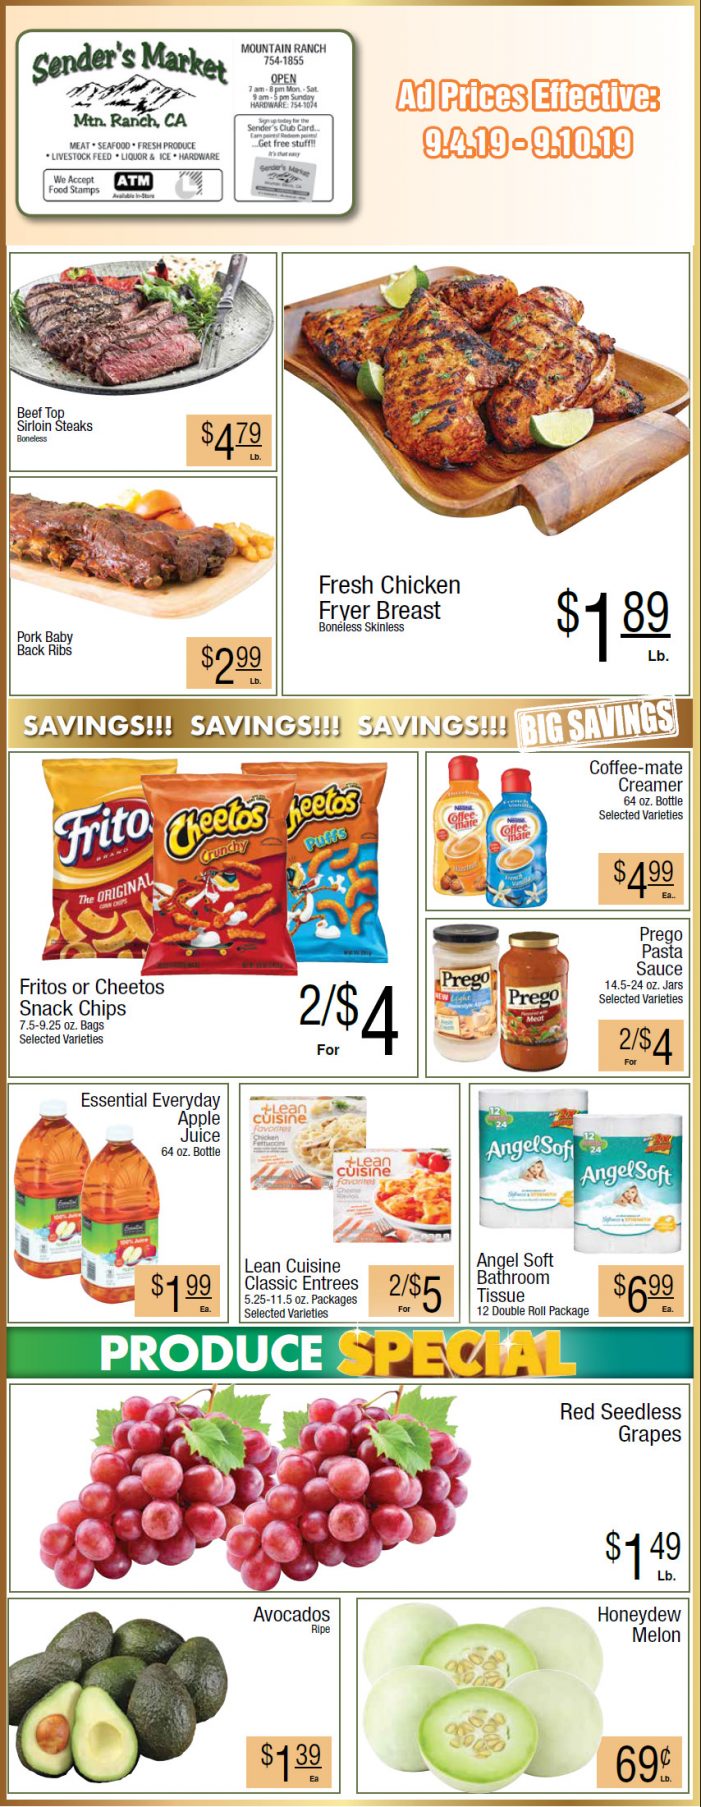 Sender’s Market Weekly Ad & Grocery Specials Through September 10th